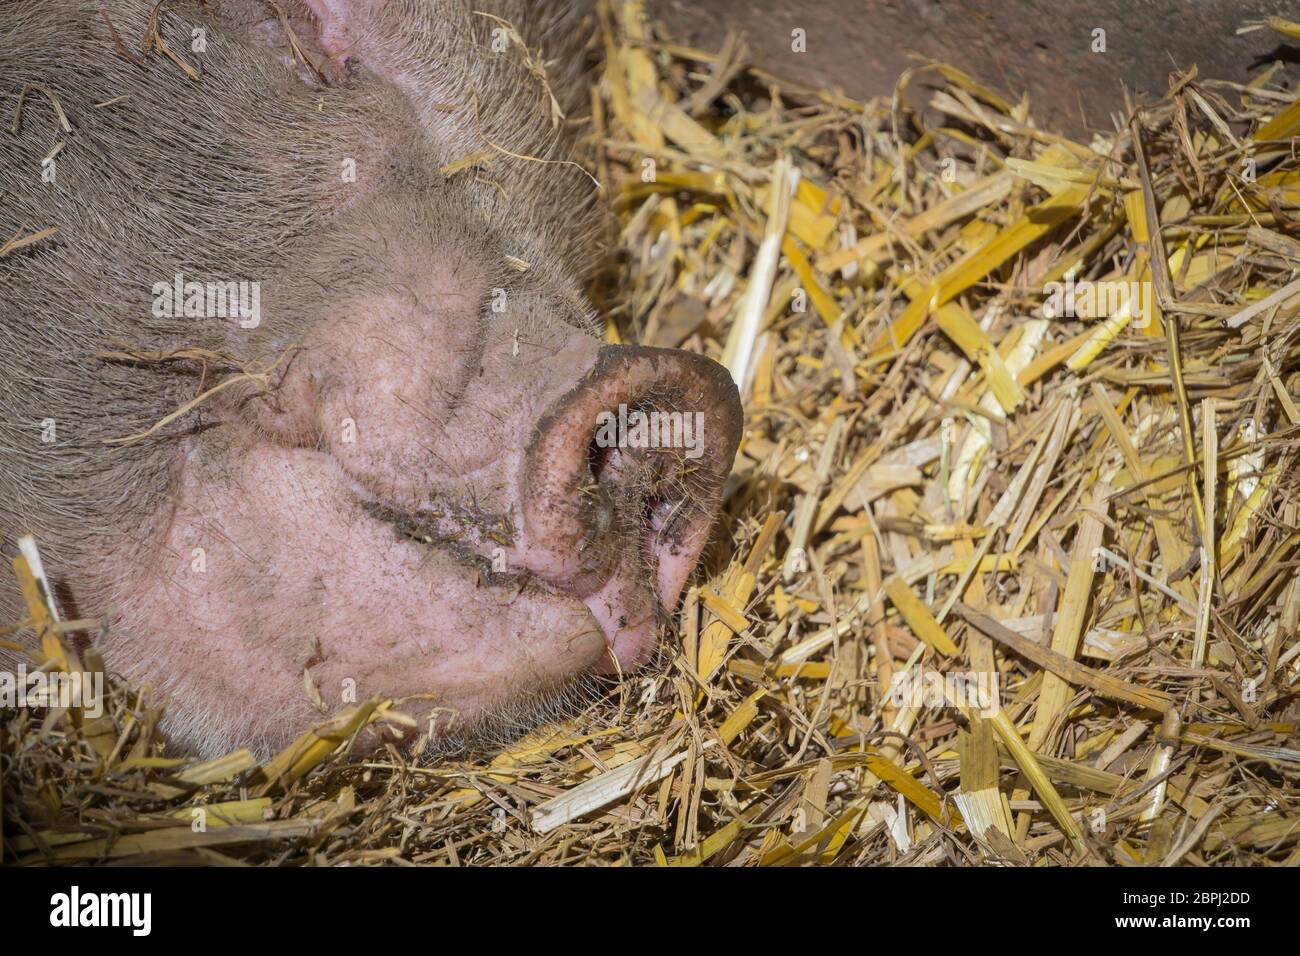 Domestic pig, close up of snout. Cute sleeping animal pig (Sus scrofa domesticus) isolated in barn straw. UK livestock, keeping pigs. Stock Photo